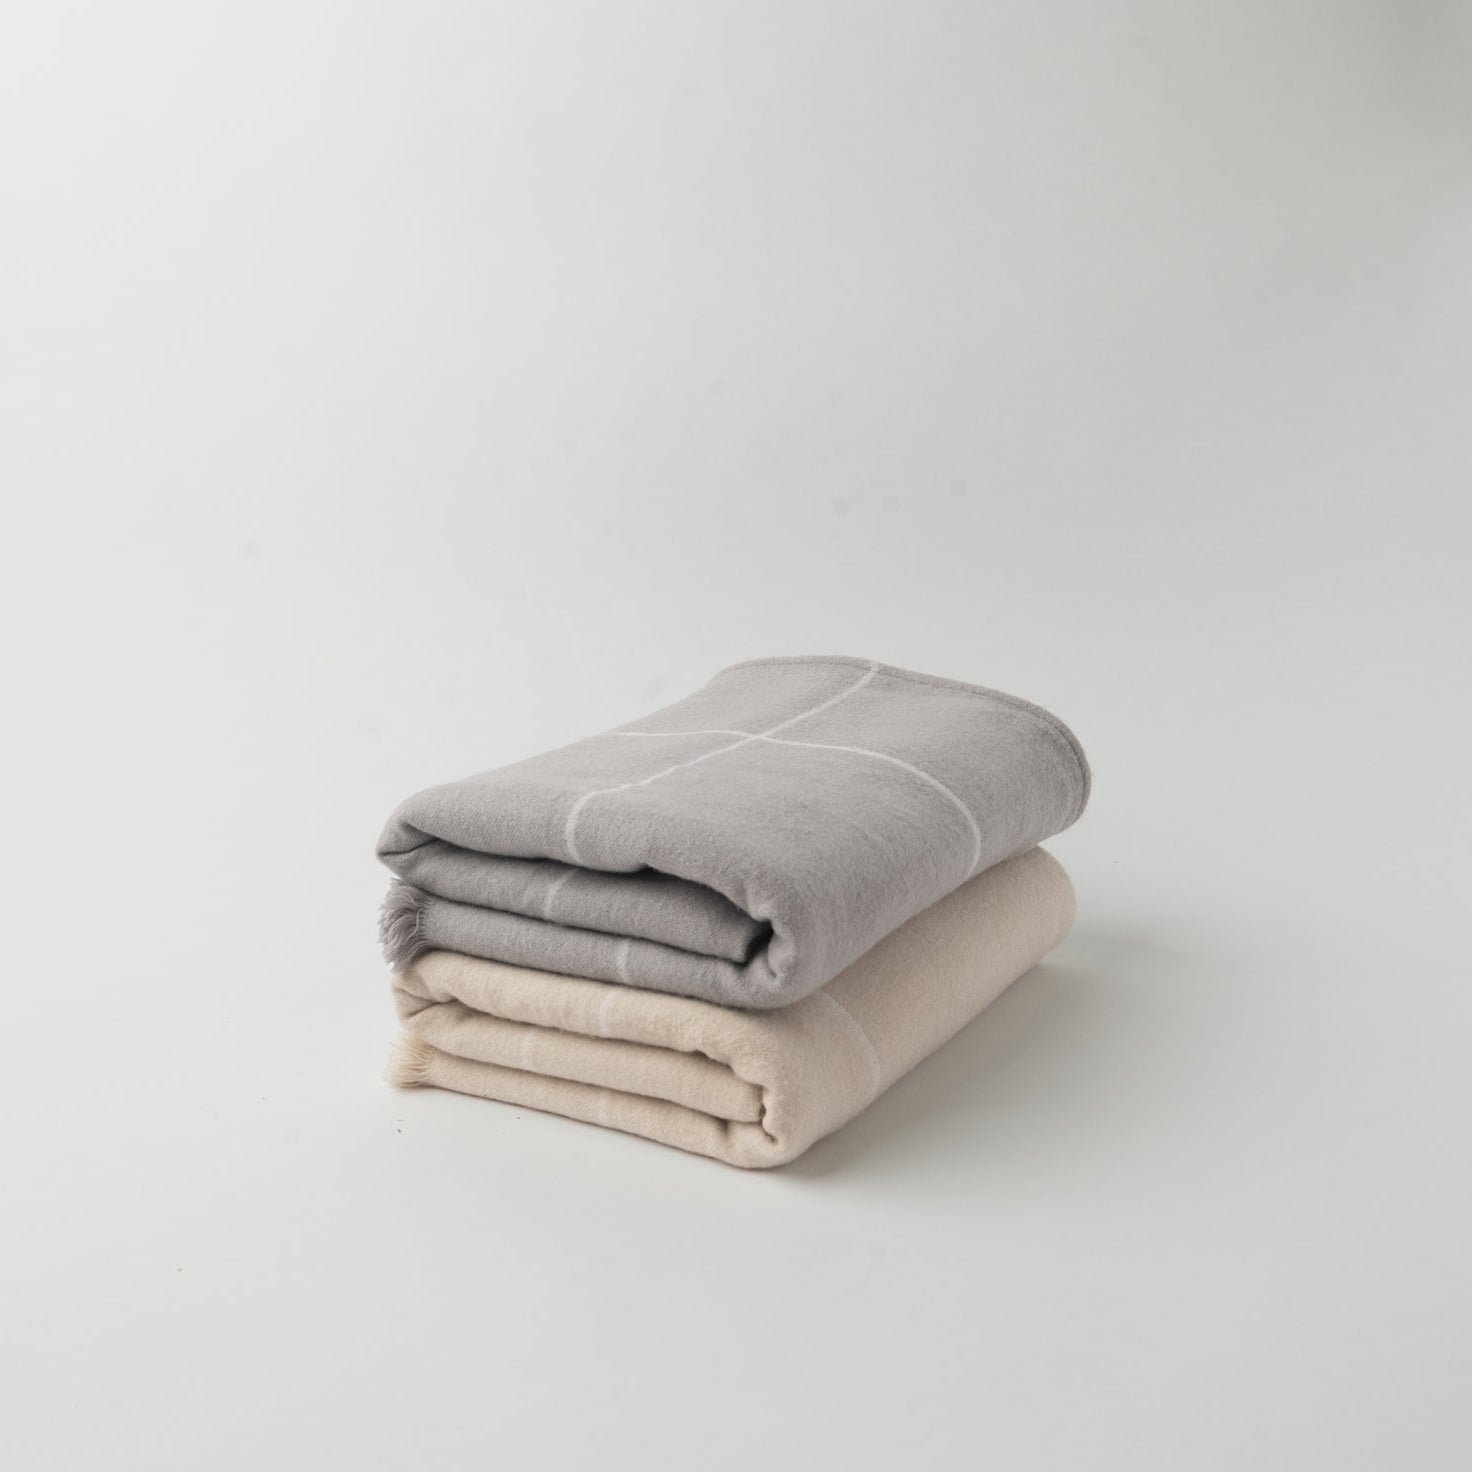 Dove Grey/Light Grey and Beige/Creme windowpane blankets folded with plain background